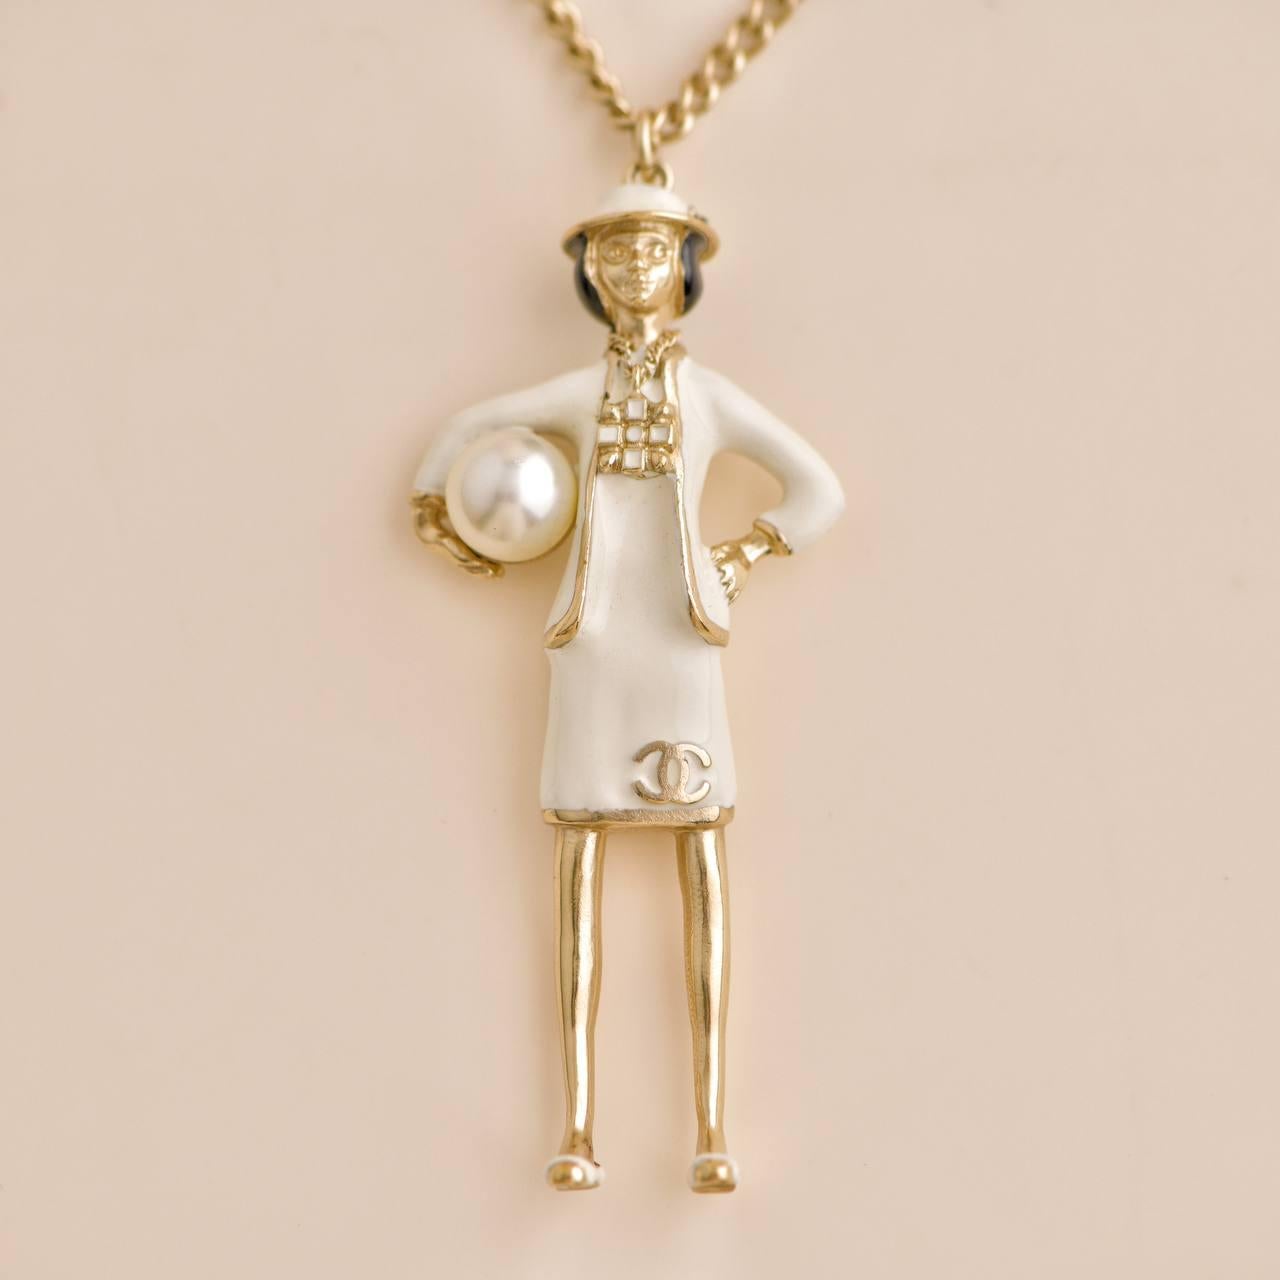 Women's or Men's Chanel Coco Mademoiselle Figurine Enamel Gold Tone Necklace For Sale